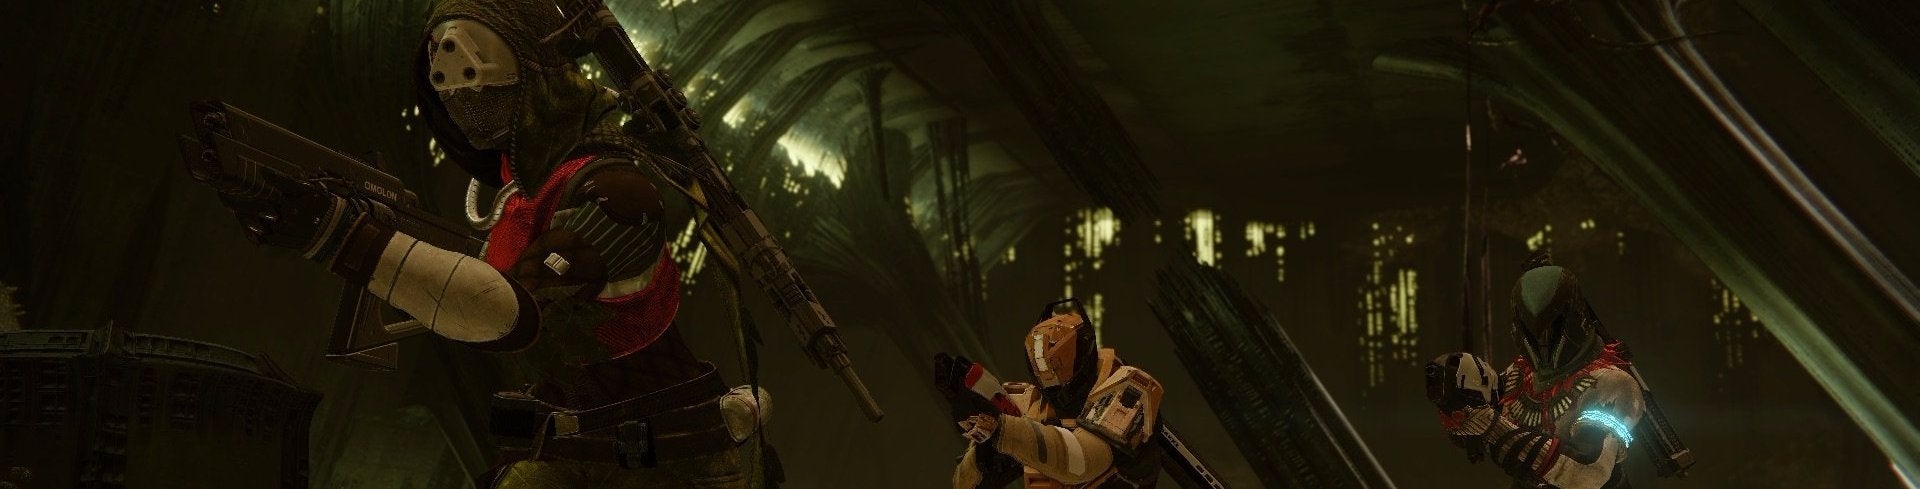 Image for Destiny: King's Fall - Hard Mode guide